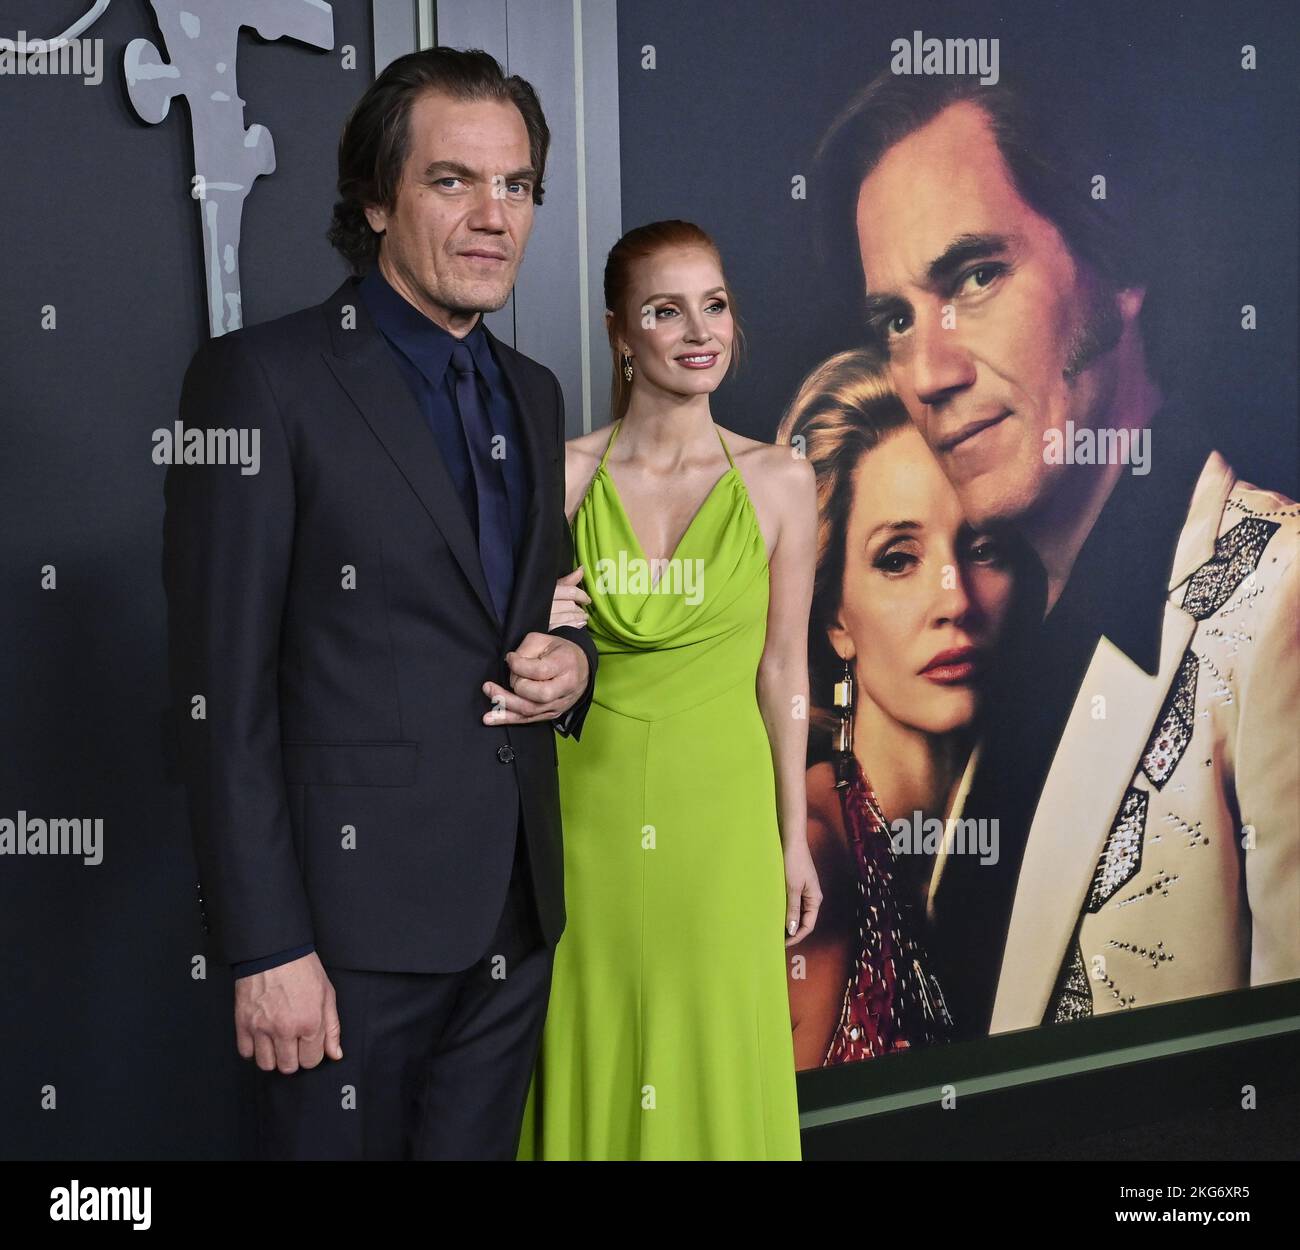 Los Angeles, United States. 21st Nov, 2022. Cast members Michael Shannon (L) and Jessica Chastain attend the premiere of Showtime's biographical TV series 'George & Tammy' at Goya Studios in Los Angeles on Monday, November 21, 2022. Storyline: The limited-series chronicles the country music power couple, Tammy Wynette and George Jones, whose complicated (but enduring) relationship inspired some of the most iconic music of all time. Photo by Jim Ruymen/UPI Credit: UPI/Alamy Live News Stock Photo